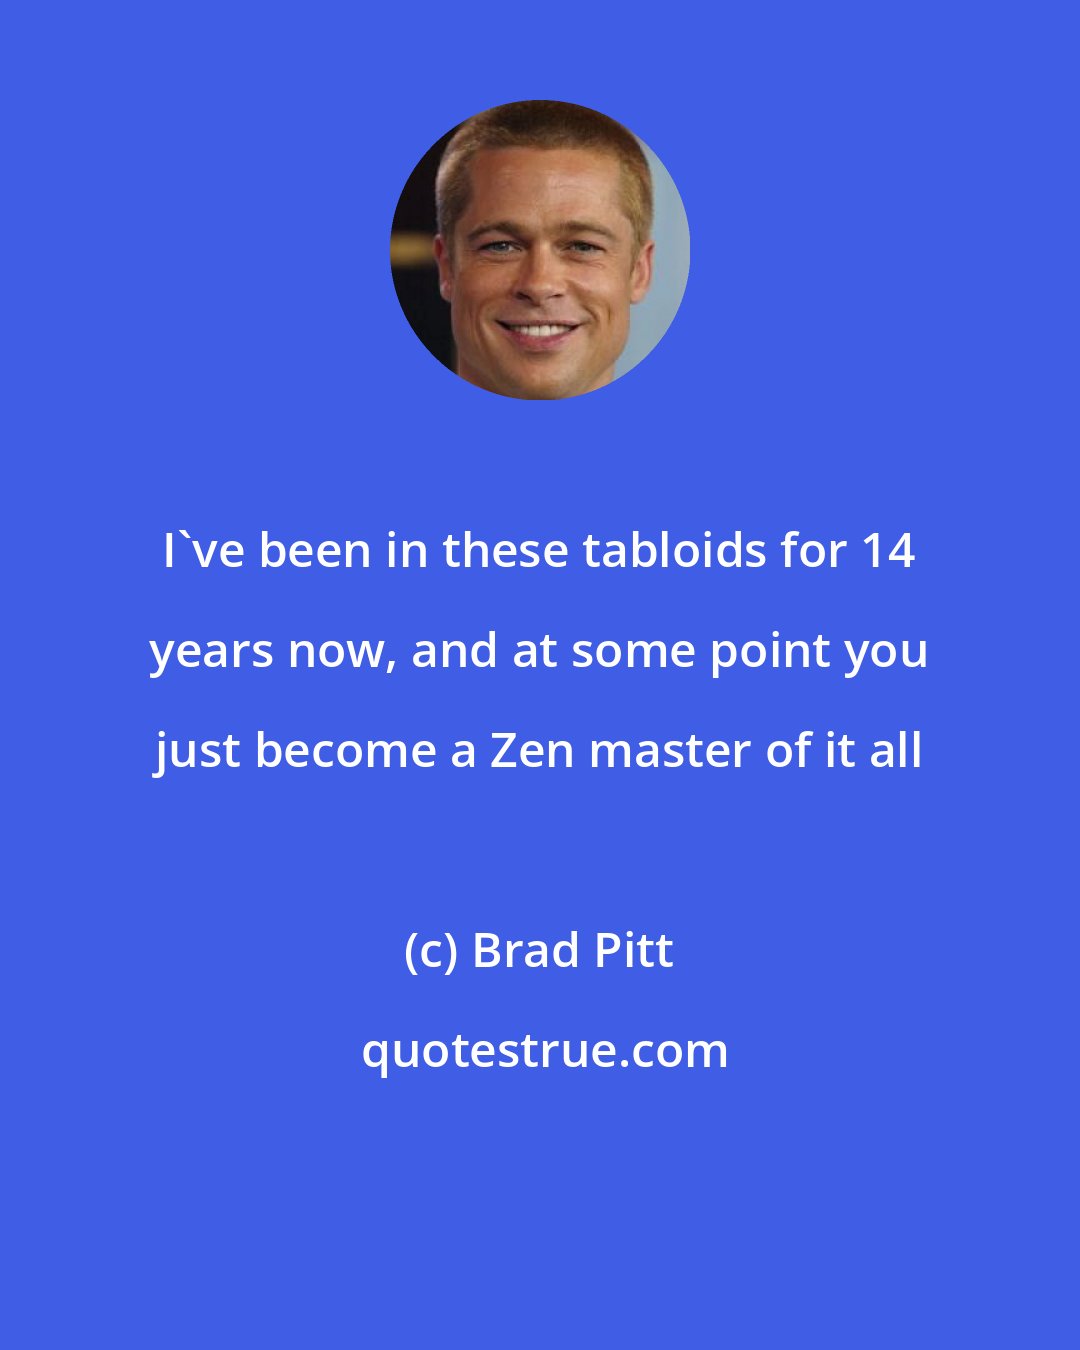 Brad Pitt: I've been in these tabloids for 14 years now, and at some point you just become a Zen master of it all